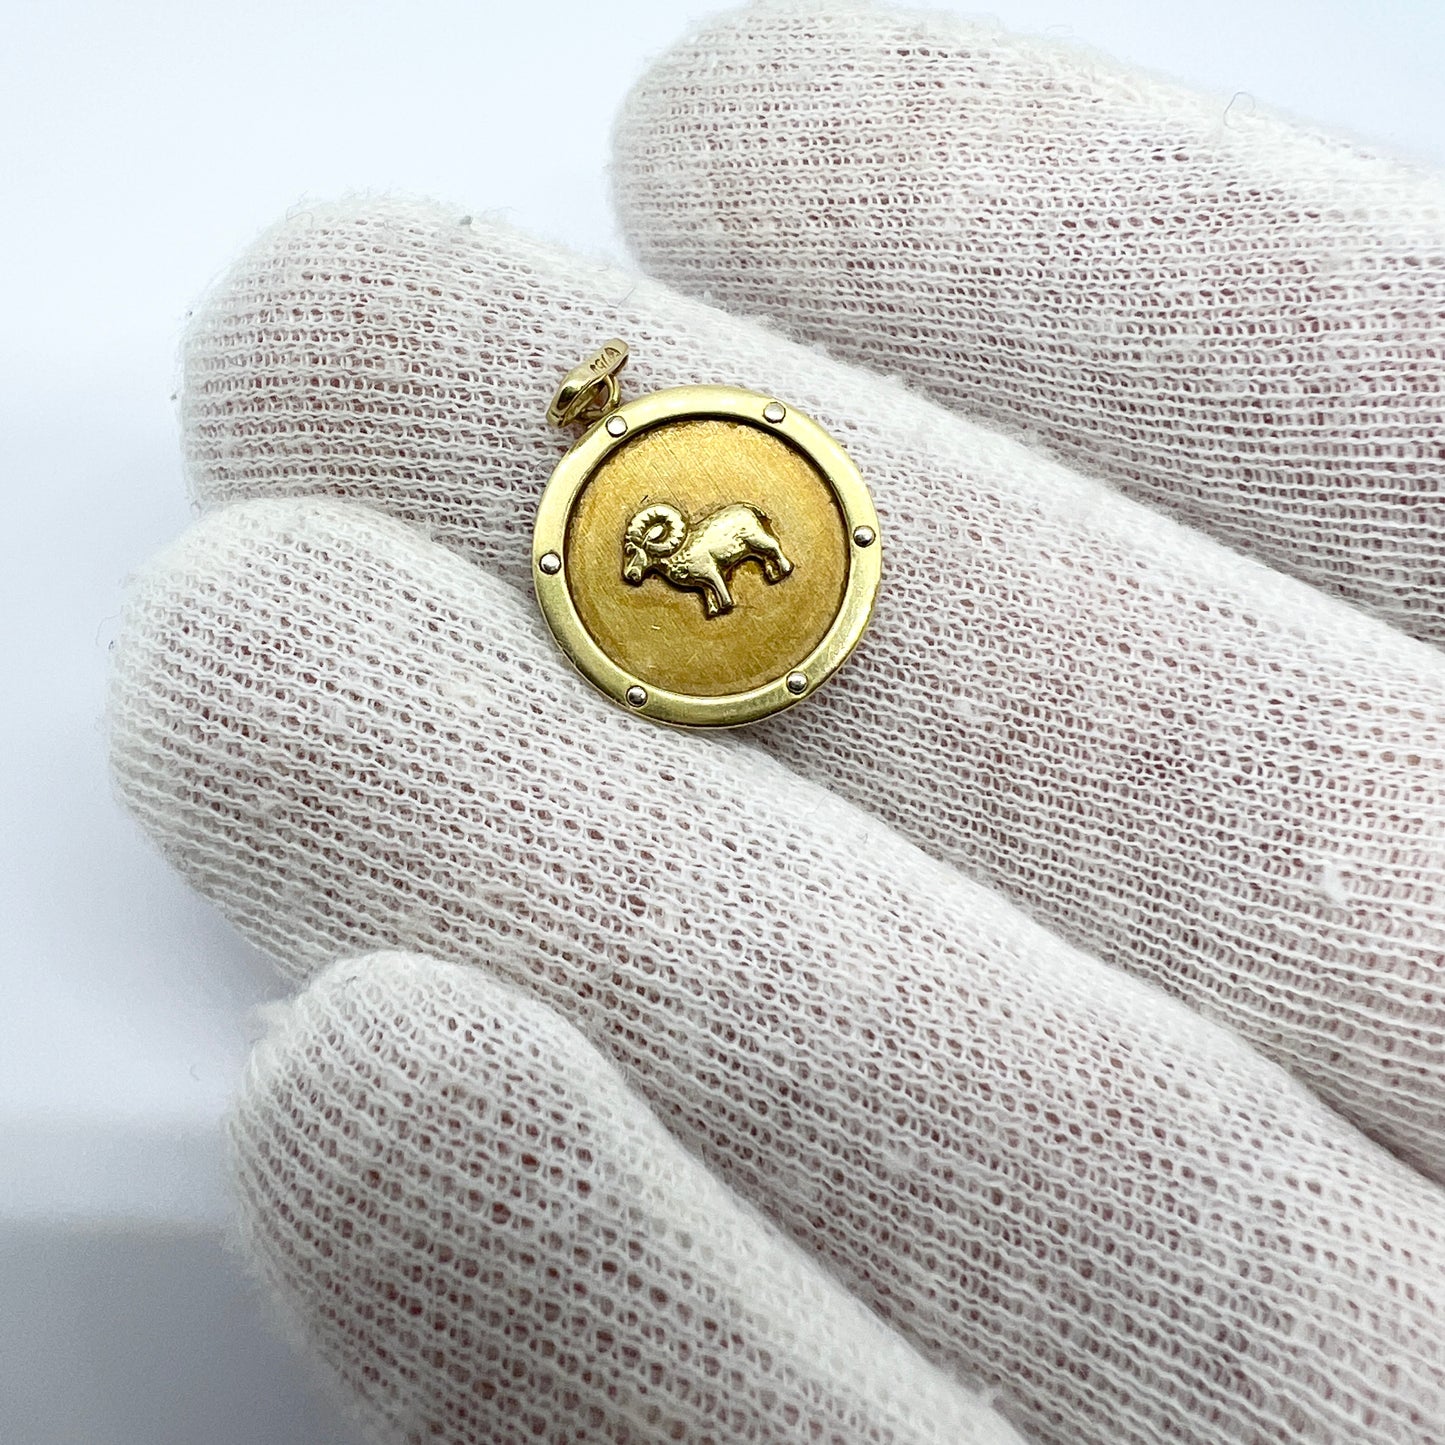 Vintage 18k Gold Zodiac Aries Charm or Small Pendant.